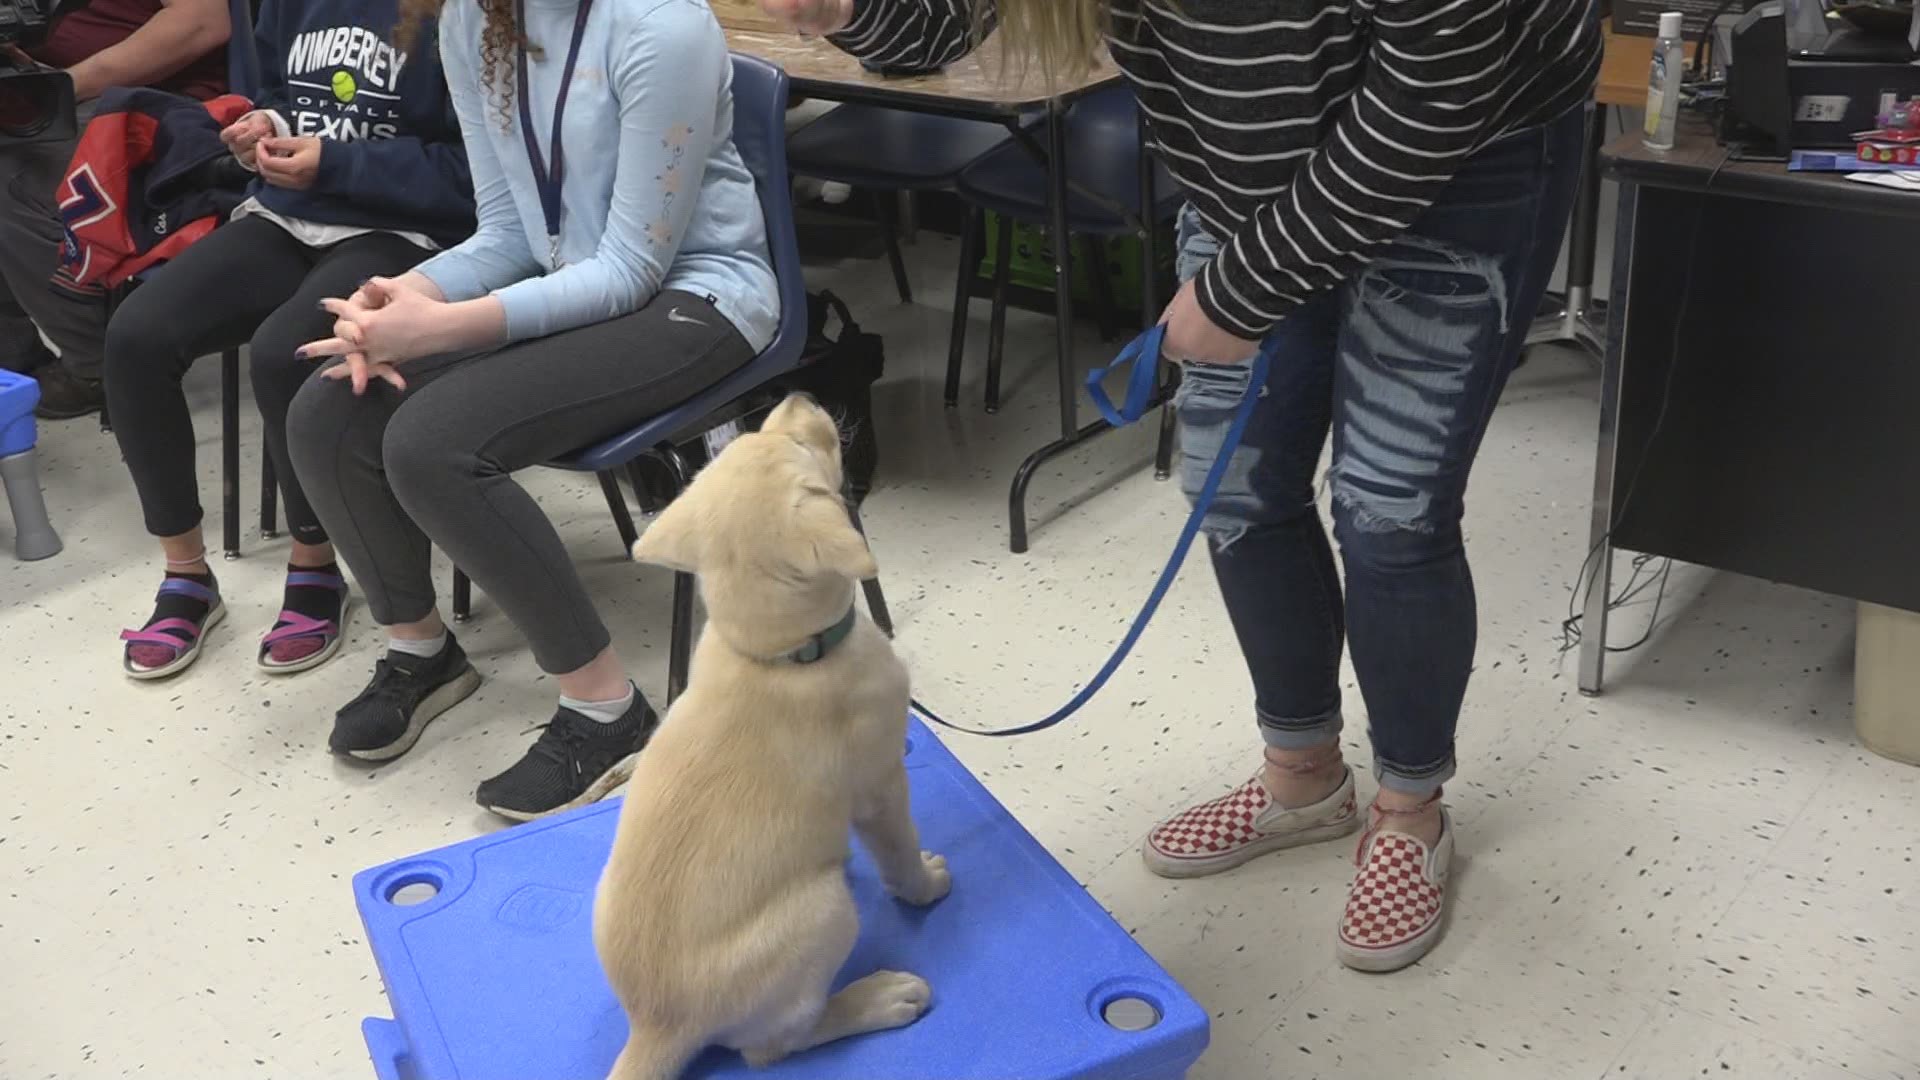 Wimberley High School has a unique spring semester program that is giving students the chance to train puppies to eventually become diabetic alert dogs